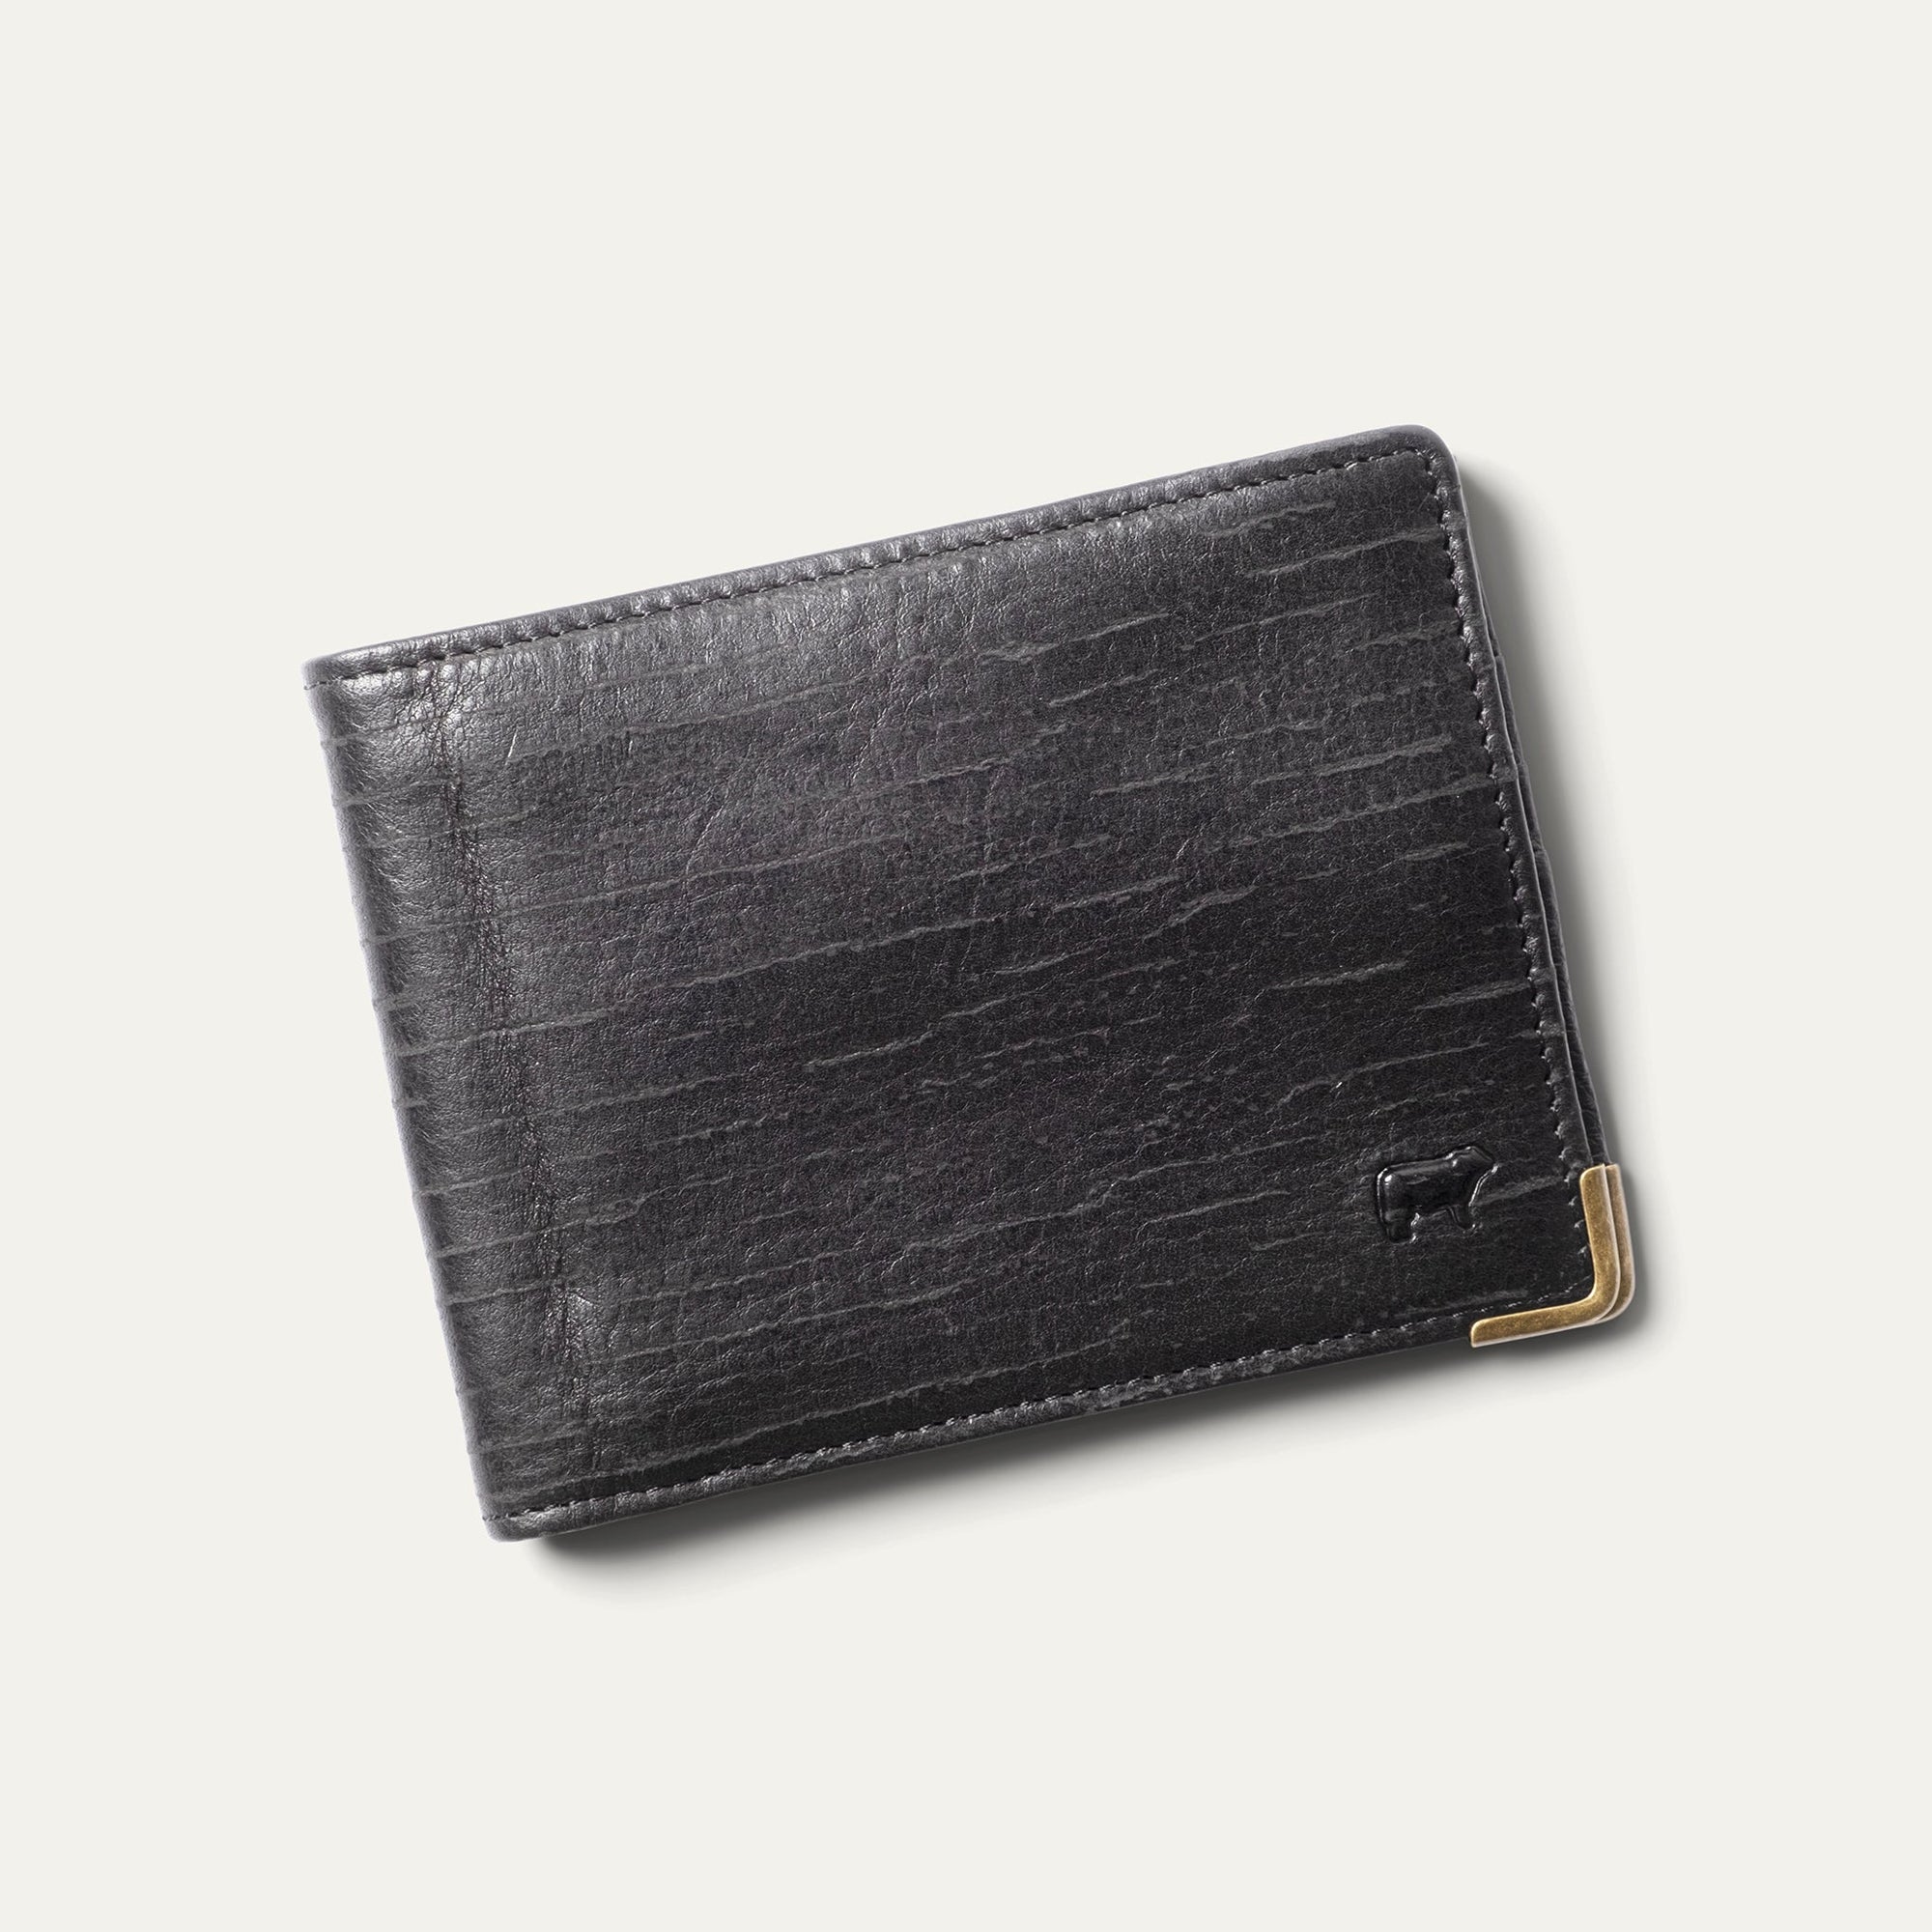 William Italian Leather Billfold Wallet in Black by Will Leather Goods